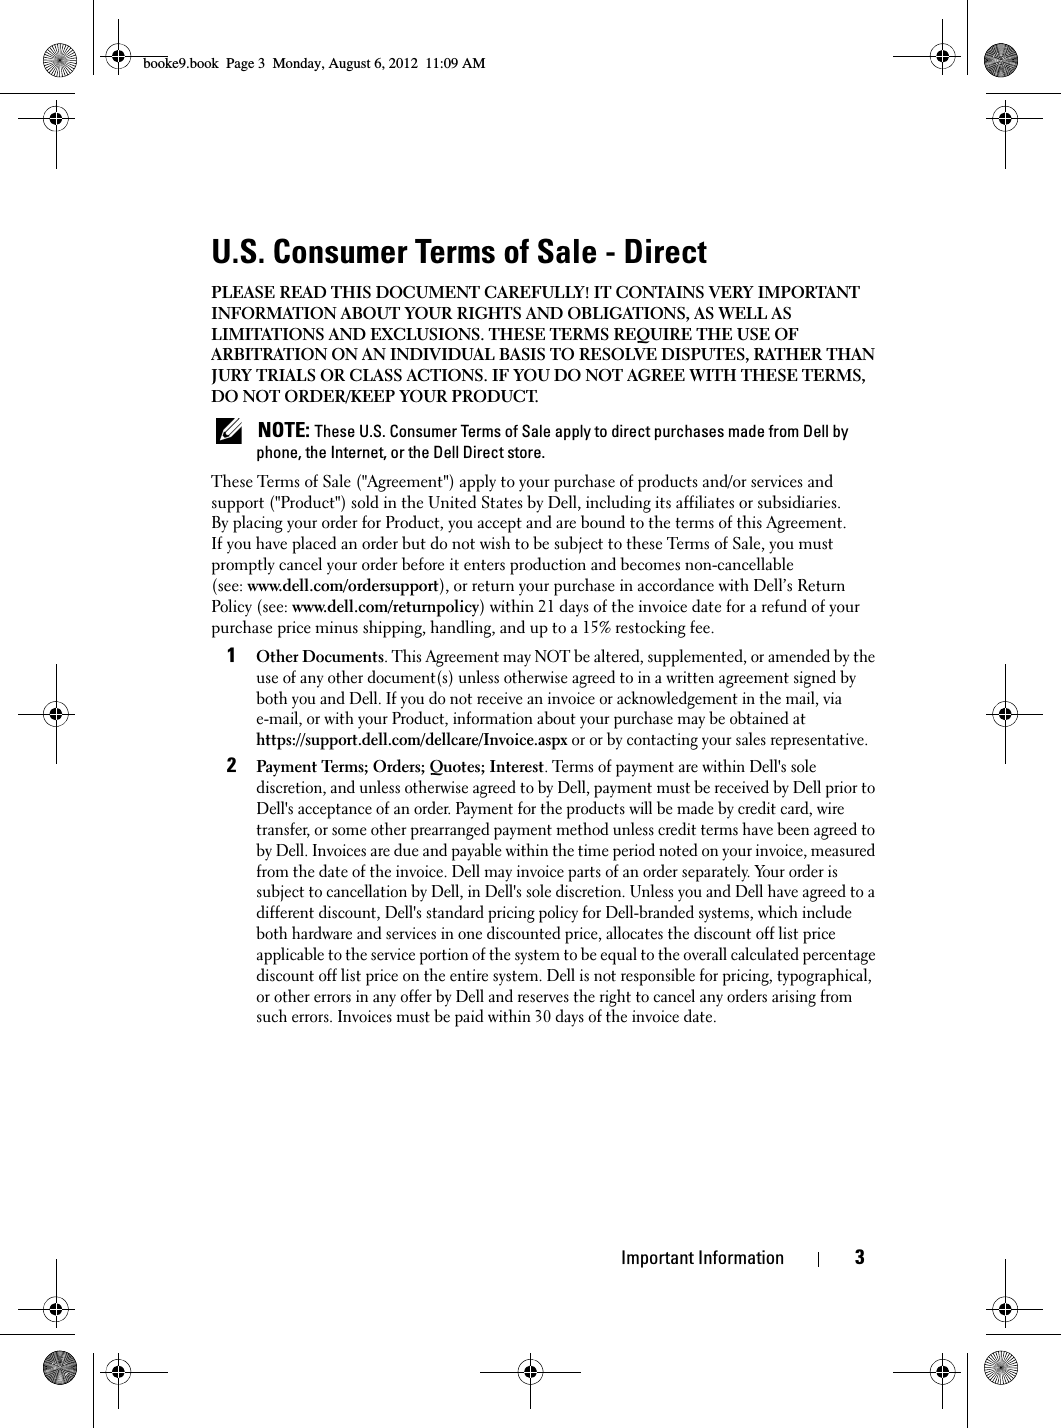 Important Information3U.S. Consumer Terms of Sale - DirectPLEASE READ THIS DOCUMENT CAREFULLY! IT CONTAINS VERY IMPORTANT INFORMATION ABOUT YOUR RIGHTS AND OBLIGATIONS, AS WELL AS LIMITATIONS AND EXCLUSIONS. THESE TERMS REQUIRE THE USE OF ARBITRATION ON AN INDIVIDUAL BASIS TO RESOLVE DISPUTES, RATHER THAN JURY TRIALS OR CLASS ACTIONS. IF YOU DO NOT AGREE WITH THESE TERMS, DO NOT ORDER/KEEP YOUR PRODUCT. NOTE: These U.S. Consumer Terms of Sale apply to direct purchases made from Dell by phone, the Internet, or the Dell Direct store.These Terms of Sale (&quot;Agreement&quot;) apply to your purchase of products and/or services and support (&quot;Product&quot;) sold in the United States by Dell, including its affiliates or subsidiaries. By placing your order for Product, you accept and are bound to the terms of this Agreement. If you have placed an order but do not wish to be subject to these Terms of Sale, you must promptly cancel your order before it enters production and becomes non-cancellable (see: www.dell.com/ordersupport), or return your purchase in accordance with Dell’s Return Policy (see: www.dell.com/returnpolicy) within 21 days of the invoice date for a refund of your purchase price minus shipping, handling, and up to a 15% restocking fee.1Other Documents. This Agreement may NOT be altered, supplemented, or amended by the use of any other document(s) unless otherwise agreed to in a written agreement signed by both you and Dell. If you do not receive an invoice or acknowledgement in the mail, via e-mail, or with your Product, information about your purchase may be obtained at https://support.dell.com/dellcare/Invoice.aspx or or by contacting your sales representative.2Payment Terms; Orders; Quotes; Interest. Terms of payment are within Dell&apos;s sole discretion, and unless otherwise agreed to by Dell, payment must be received by Dell prior to Dell&apos;s acceptance of an order. Payment for the products will be made by credit card, wire transfer, or some other prearranged payment method unless credit terms have been agreed to by Dell. Invoices are due and payable within the time period noted on your invoice, measured from the date of the invoice. Dell may invoice parts of an order separately. Your order is subject to cancellation by Dell, in Dell&apos;s sole discretion. Unless you and Dell have agreed to a different discount, Dell&apos;s standard pricing policy for Dell-branded systems, which include both hardware and services in one discounted price, allocates the discount off list price applicable to the service portion of the system to be equal to the overall calculated percentage discount off list price on the entire system. Dell is not responsible for pricing, typographical, or other errors in any offer by Dell and reserves the right to cancel any orders arising from such errors. Invoices must be paid within 30 days of the invoice date. booke9.book  Page 3  Monday, August 6, 2012  11:09 AM